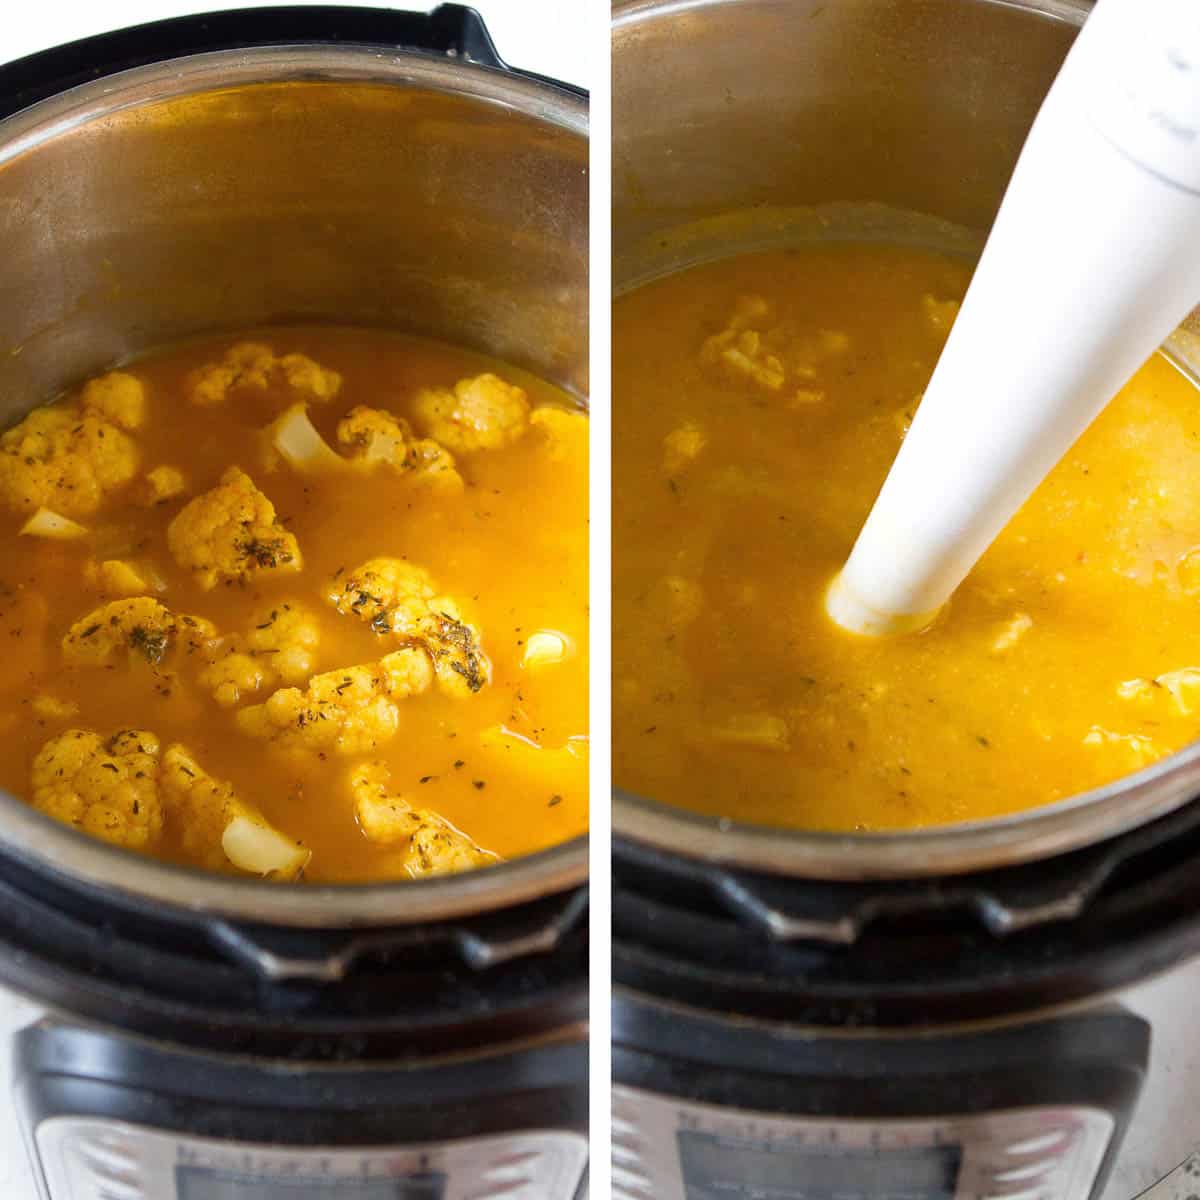 Cauliflower and broth in an Instant pot, with an immersion blender.